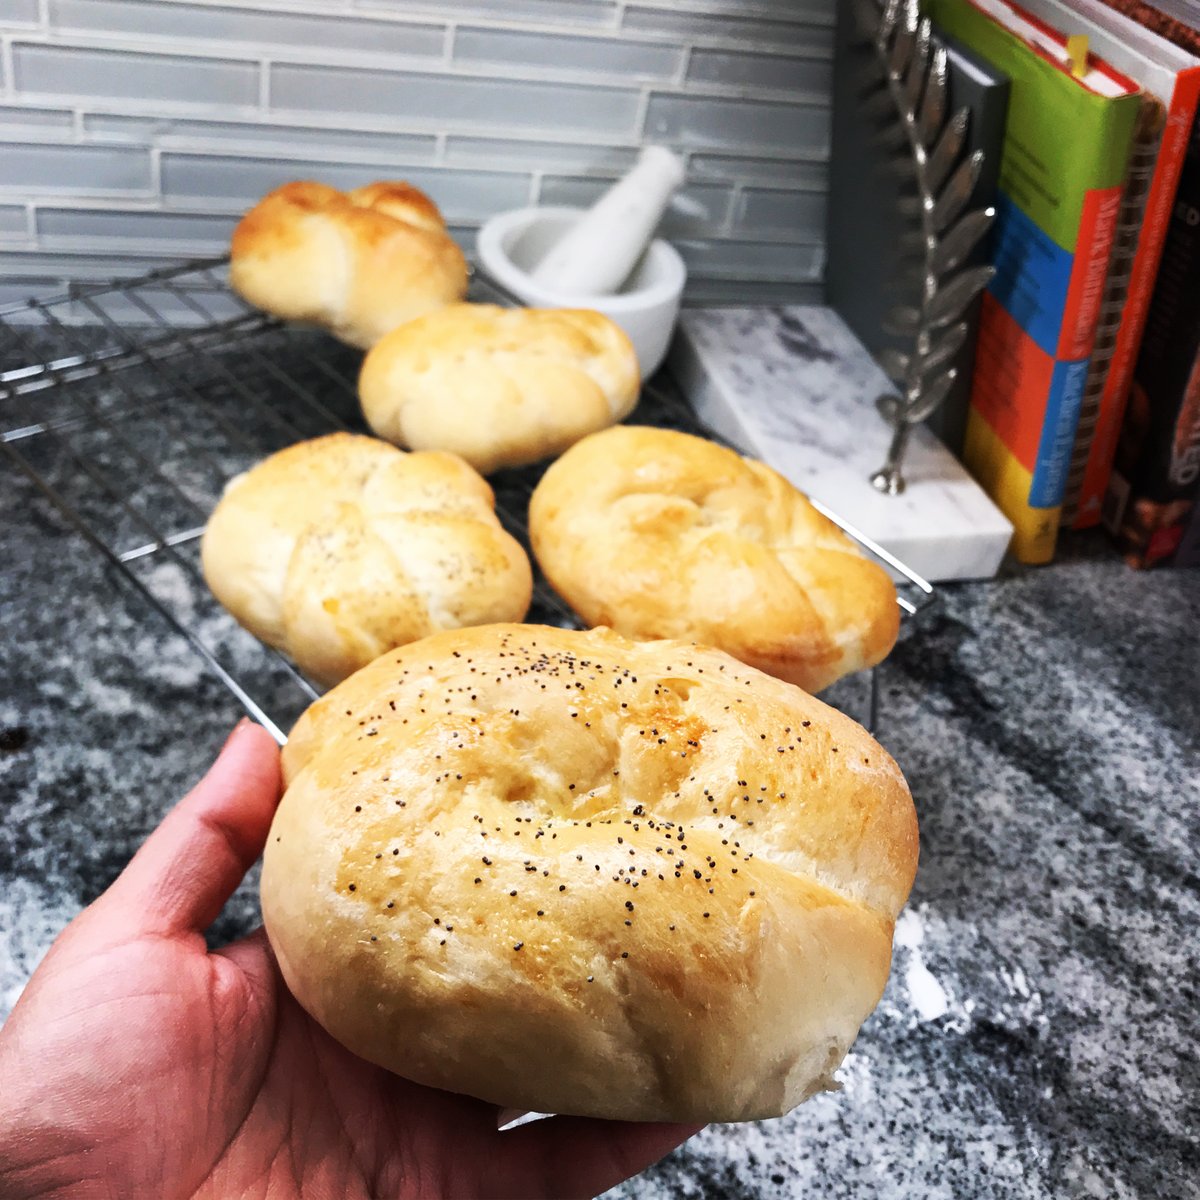 Bread #29: Kaiser Rolls. these were cool! as featured in some egg sandwiches and a brie/turkey/apple sandwich. not the most flavorful, but pretty fast and easy, and you, know. I dunno. they're kaiser rolls! they're cool if you need a sandwich on a kaiser roll!